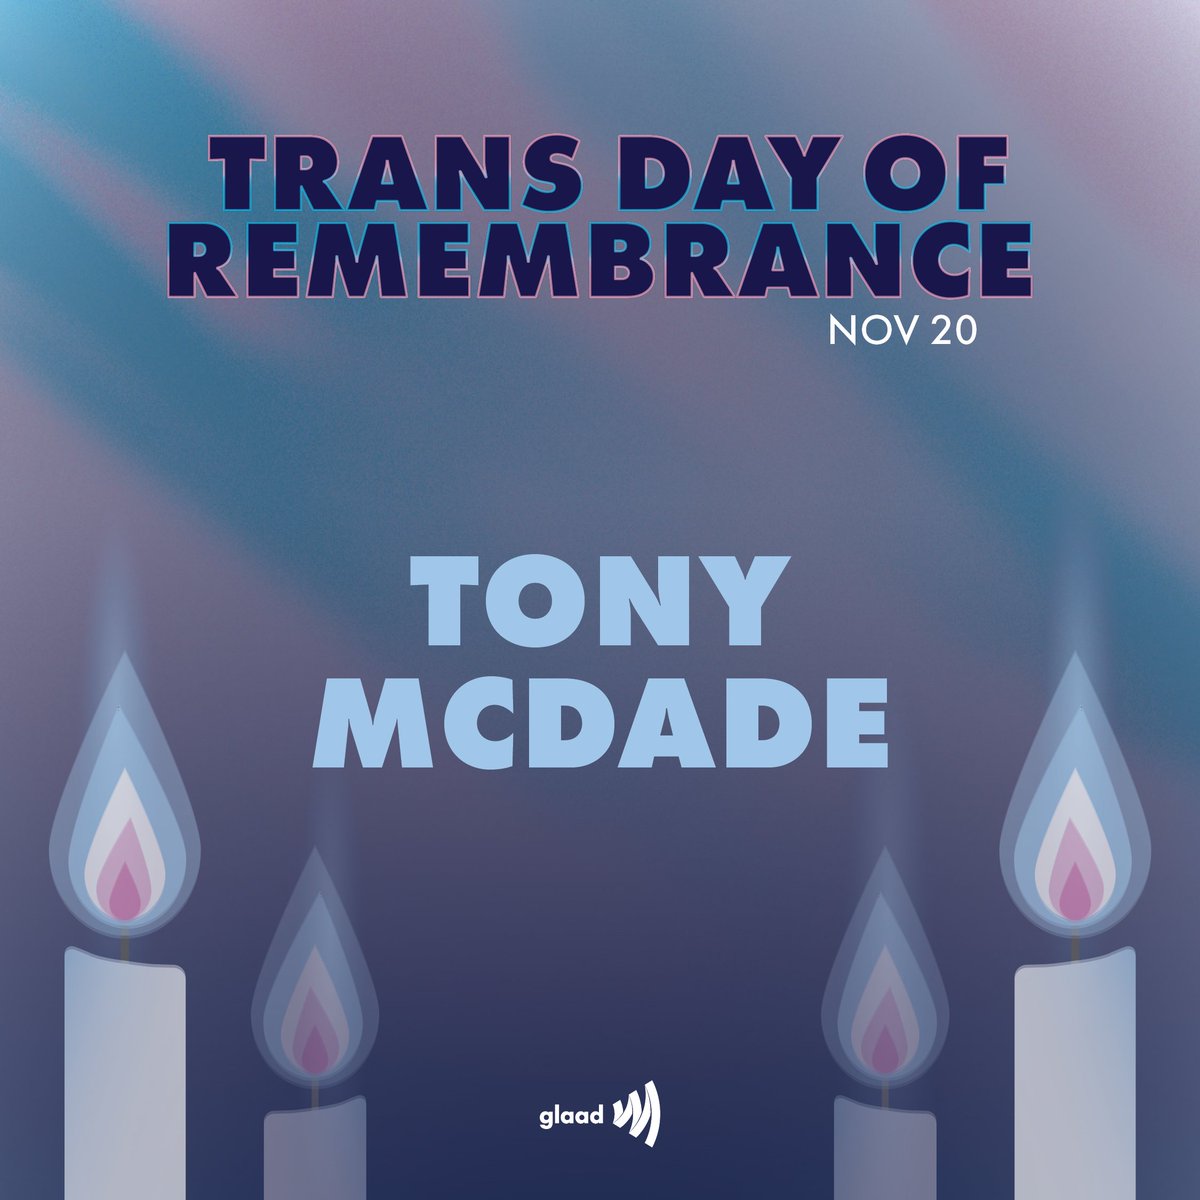 Tony McDade, a Black transgender man, was killed in Tallahasee, Florida on May 27, 2020. His loved ones remember him as being an energetic person with a big heart.